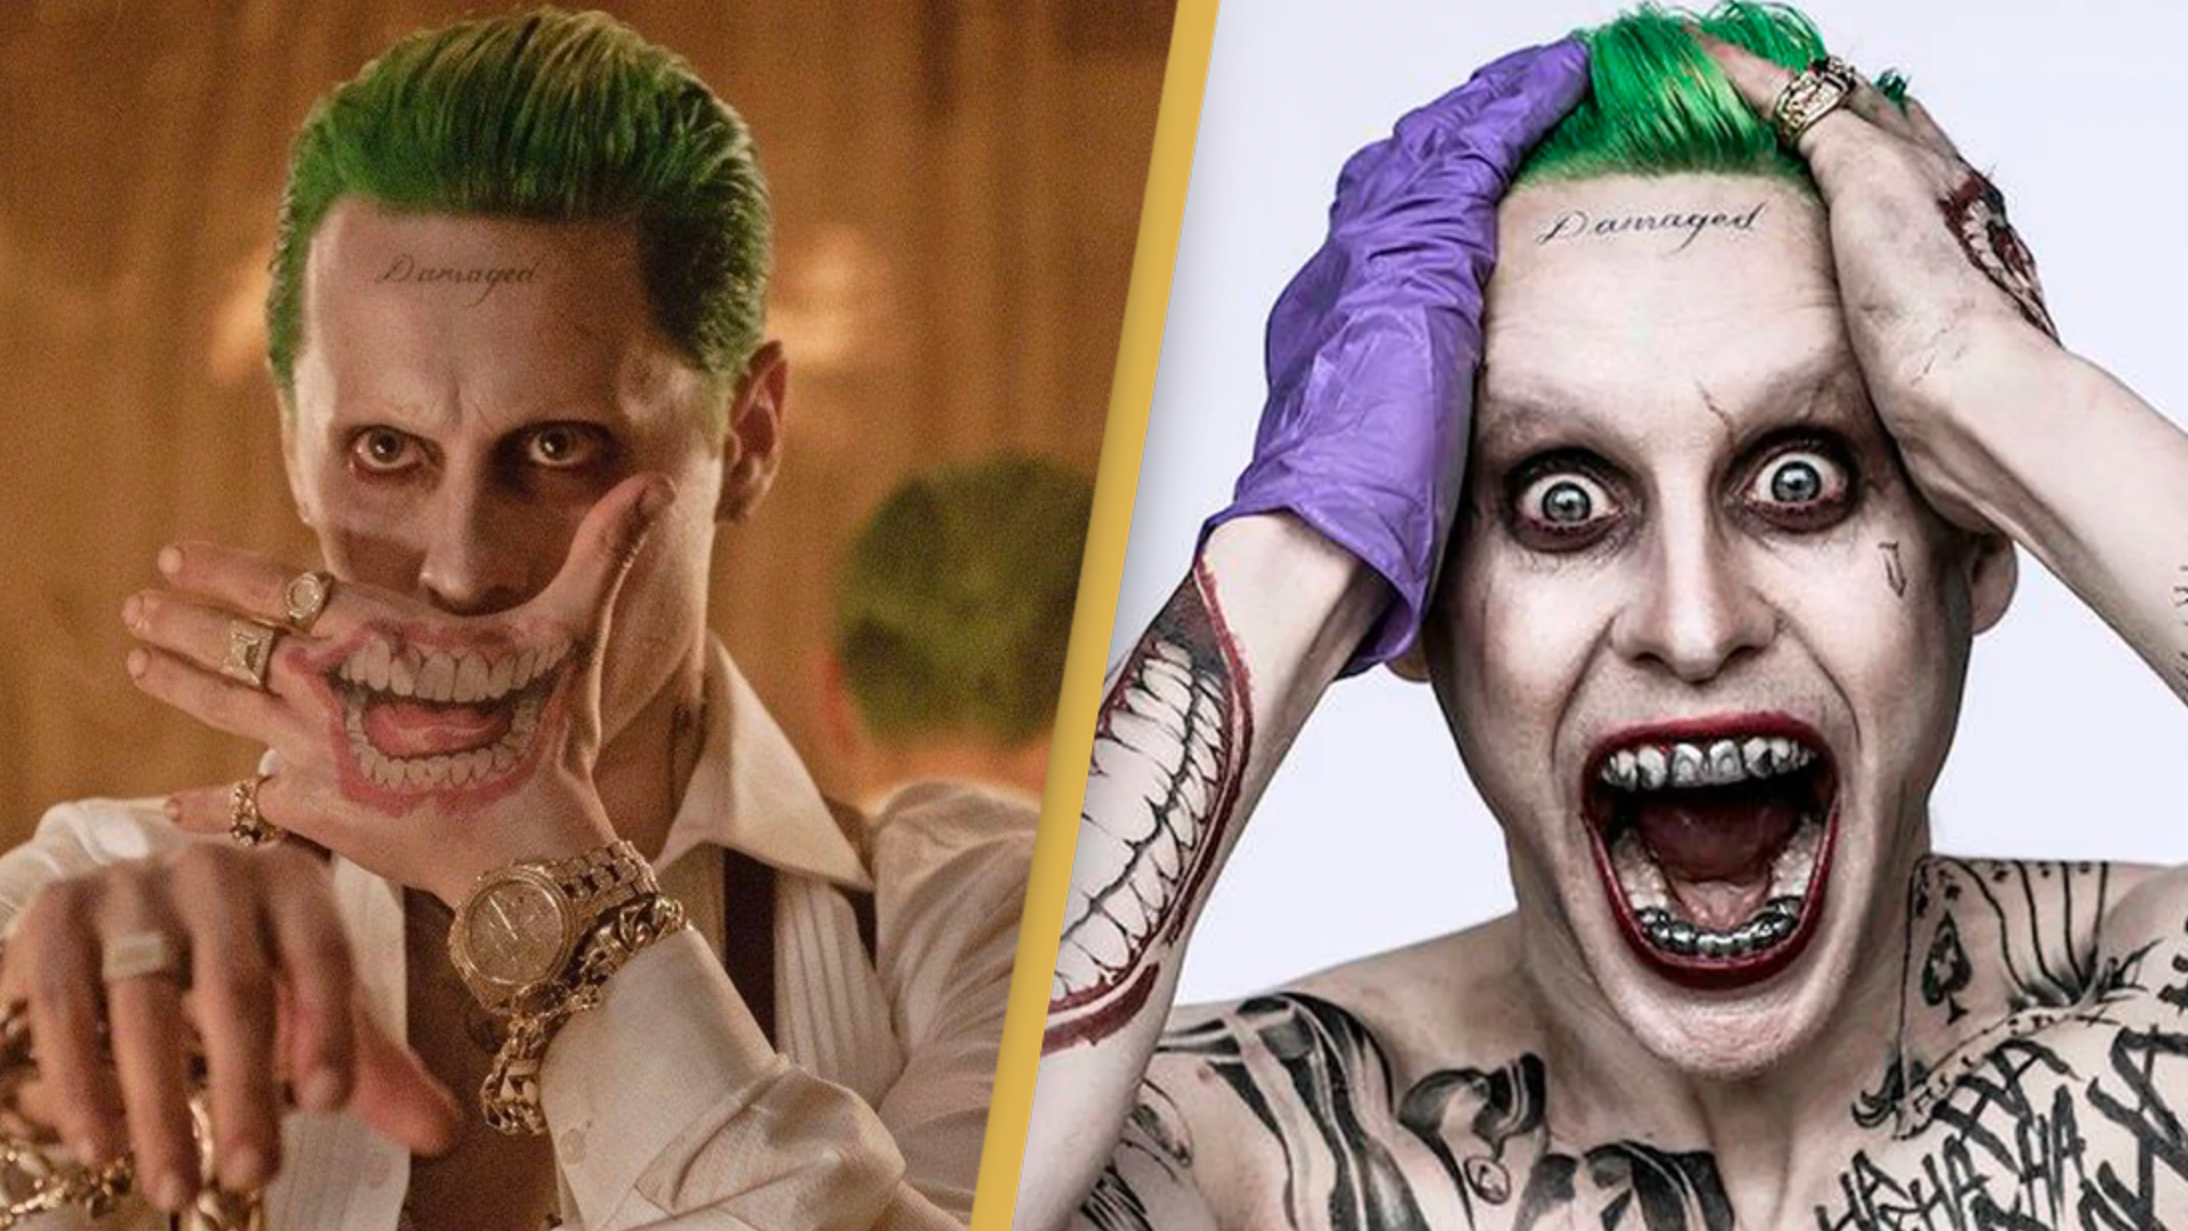 Jared Leto will play The Joker as Suicide Squad cast revealed